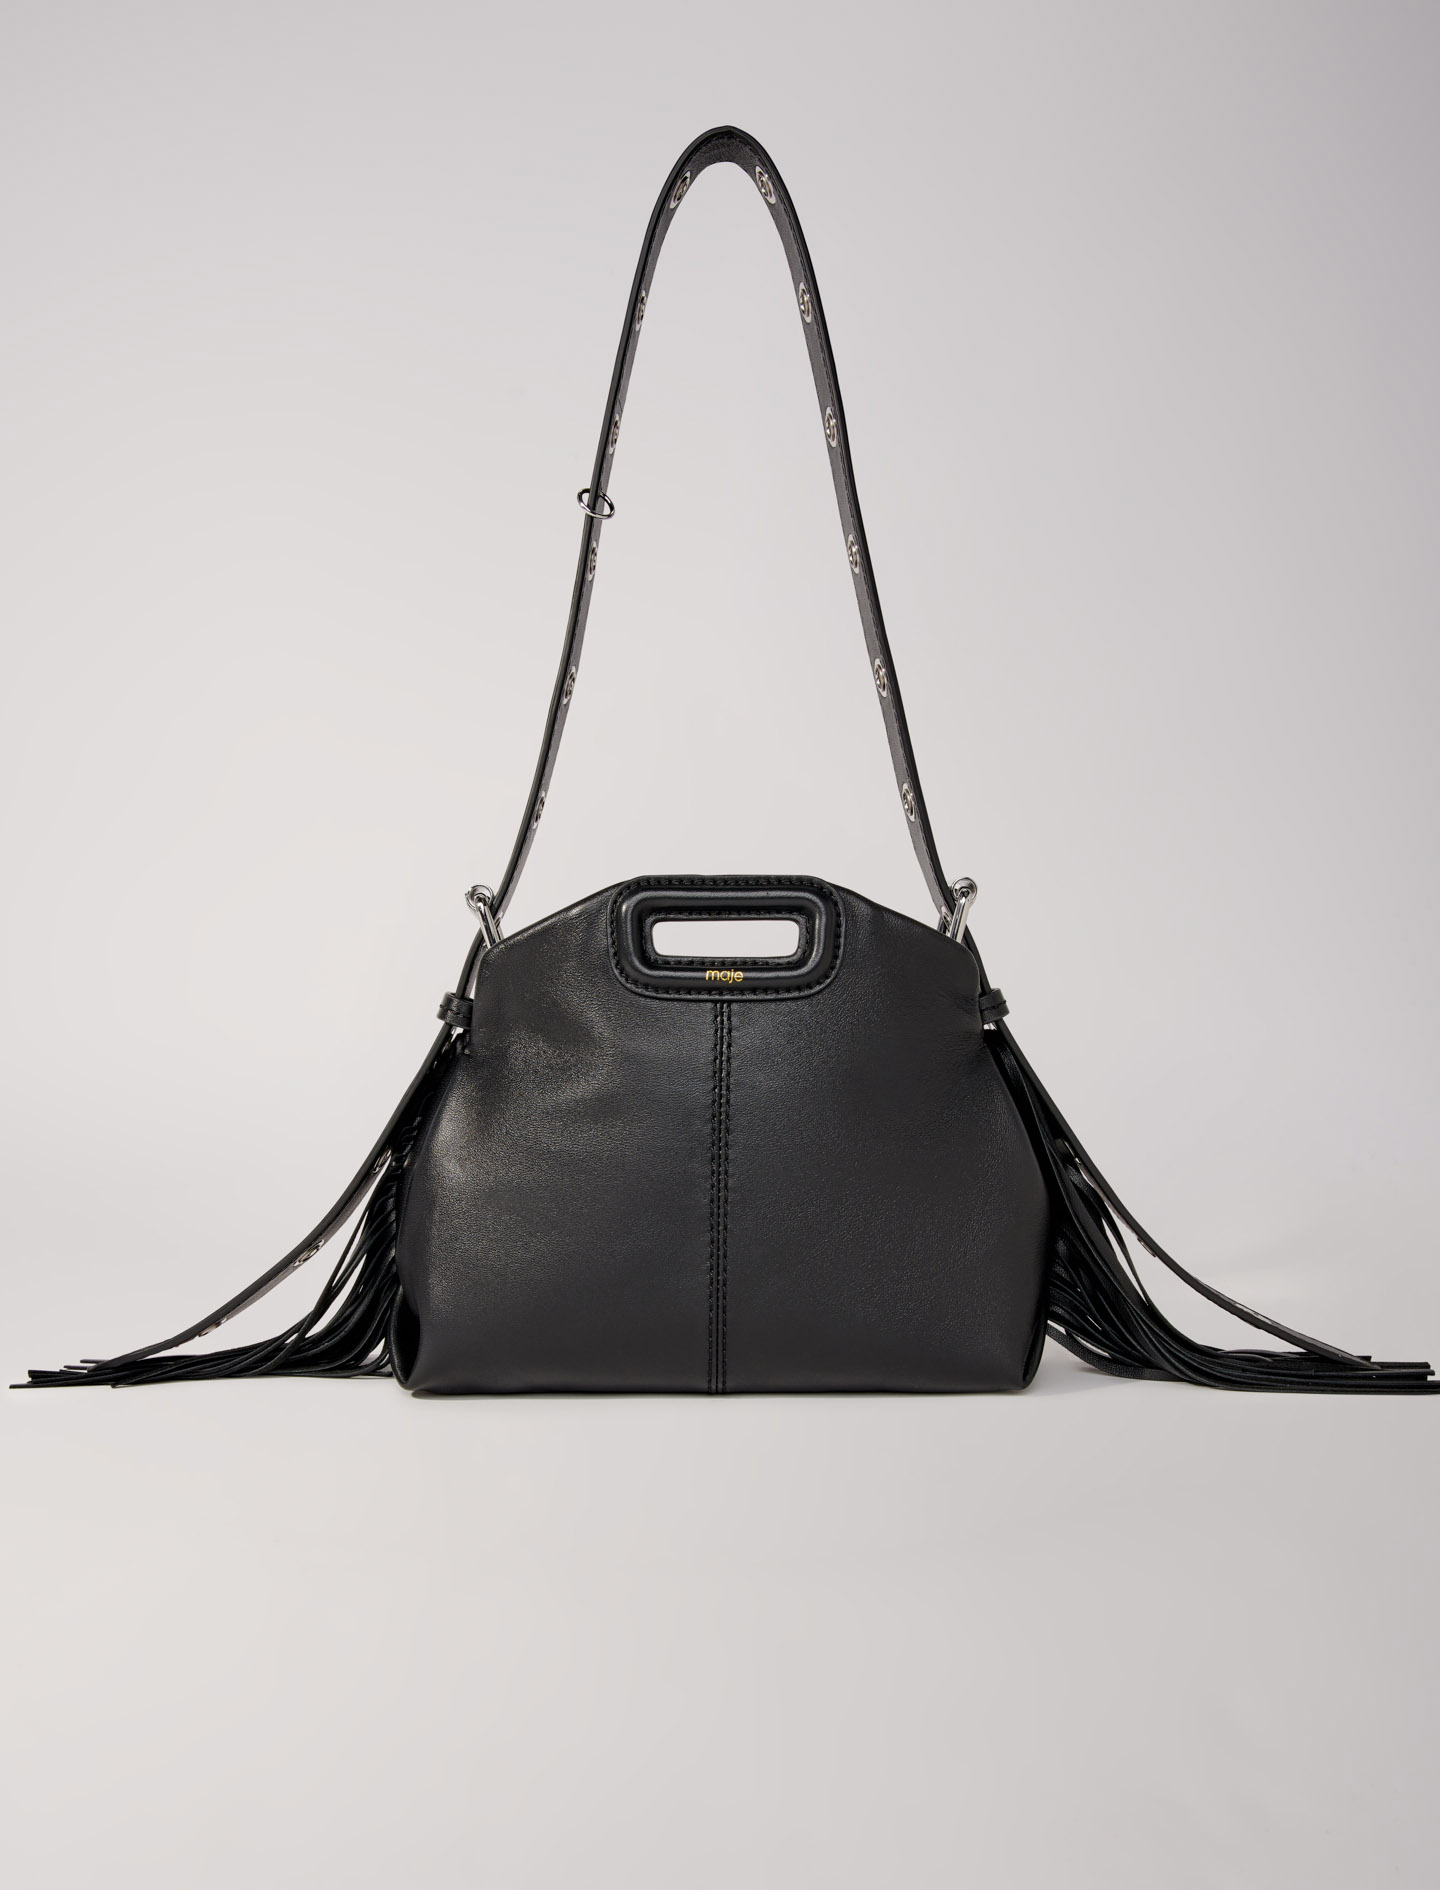 Maje Woman's cotton Leather: Smooth leather mini Miss M bag for Fall/Winter, in color Black / Black